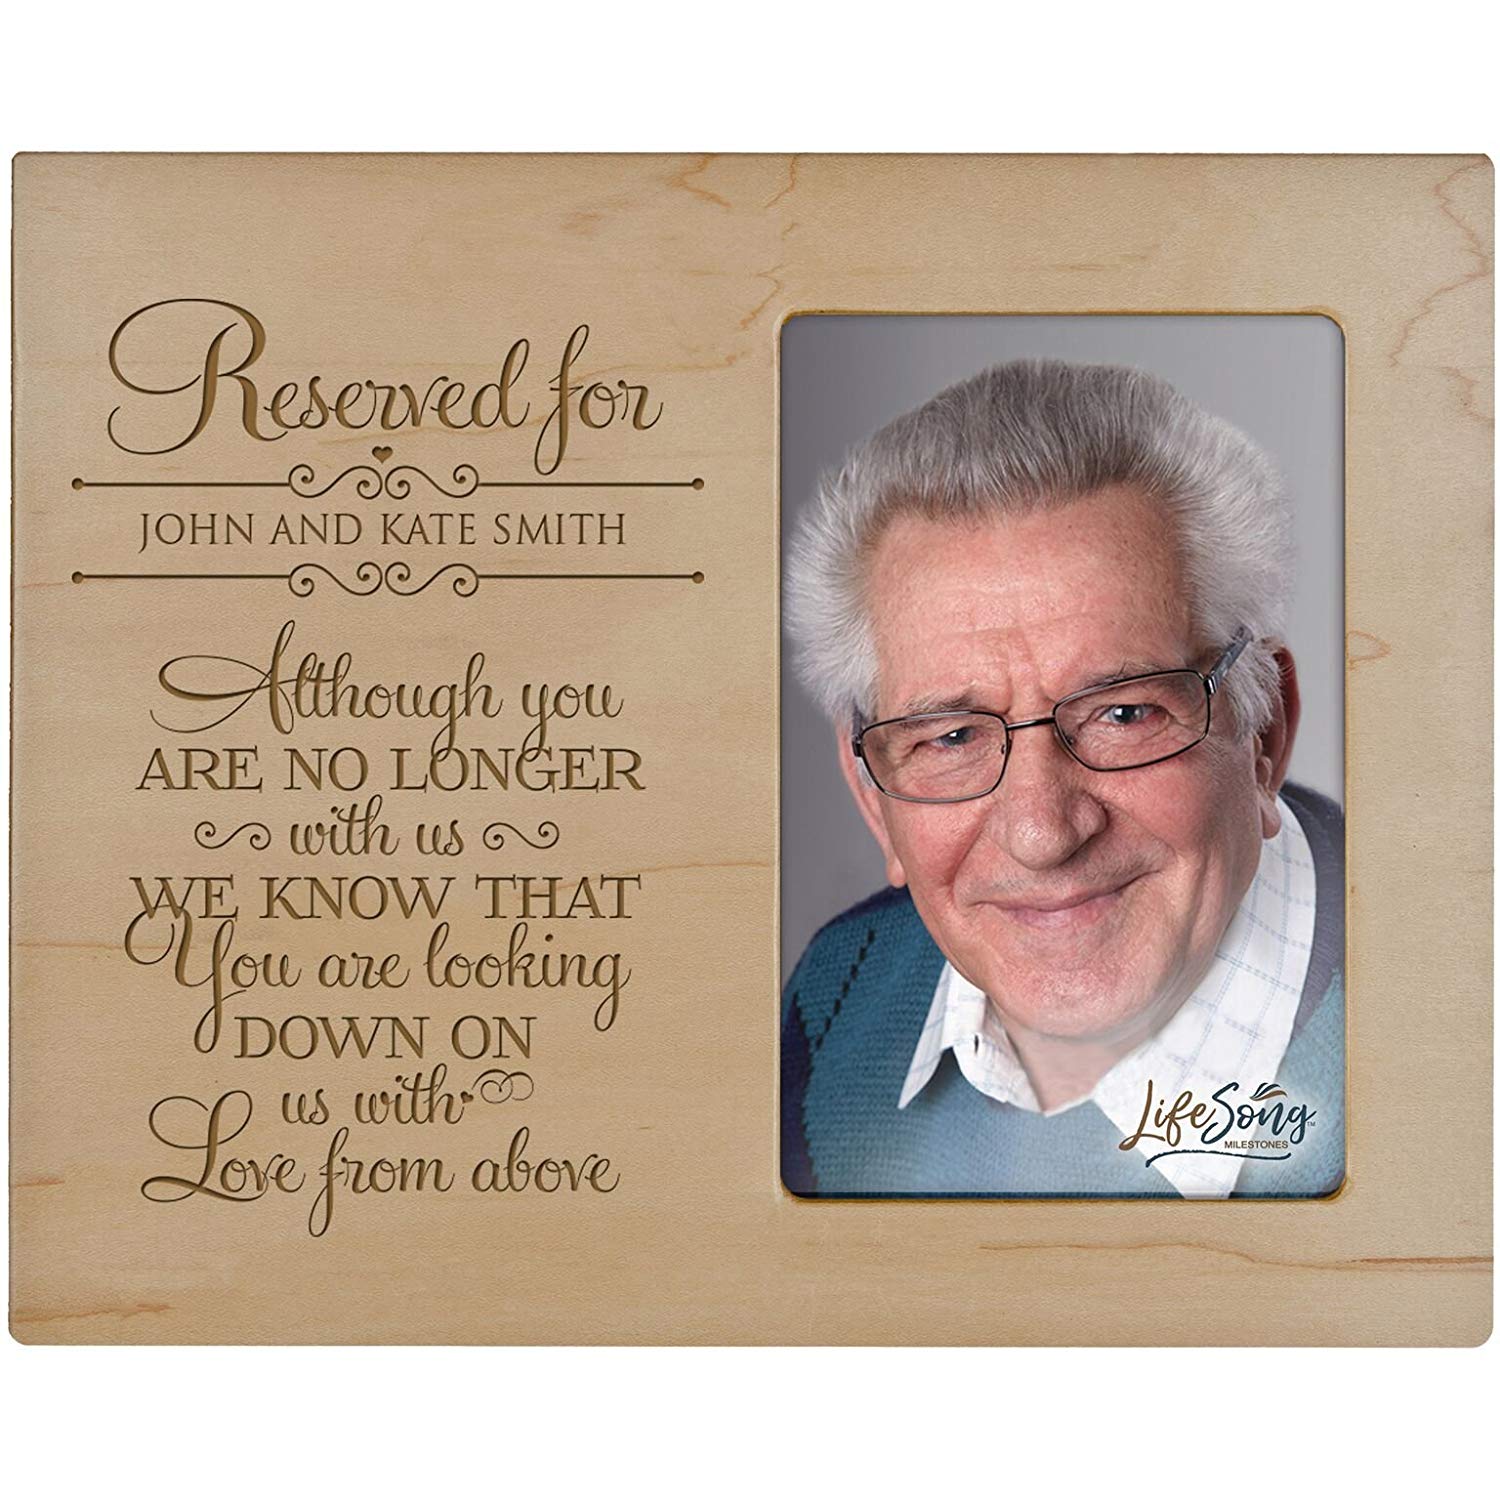 Personalized Wooden Memorial 8x10 Picture Frame holds 4x6 photo No Longer With Us - LifeSong Milestones